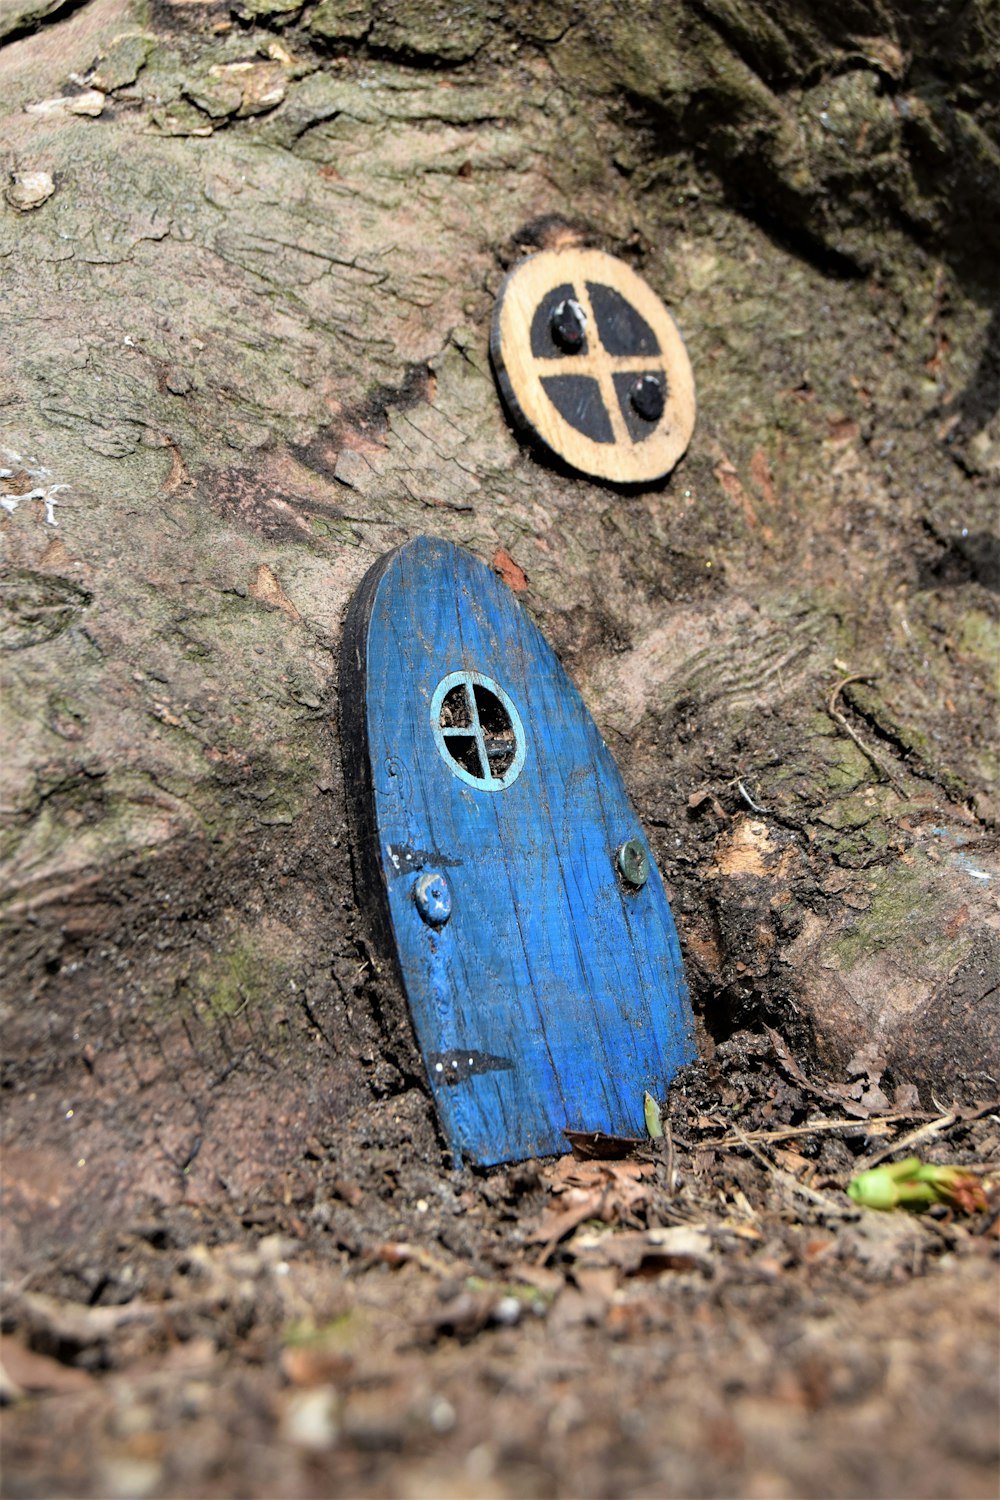 a blue hobbot sitting on the ground next to a tree